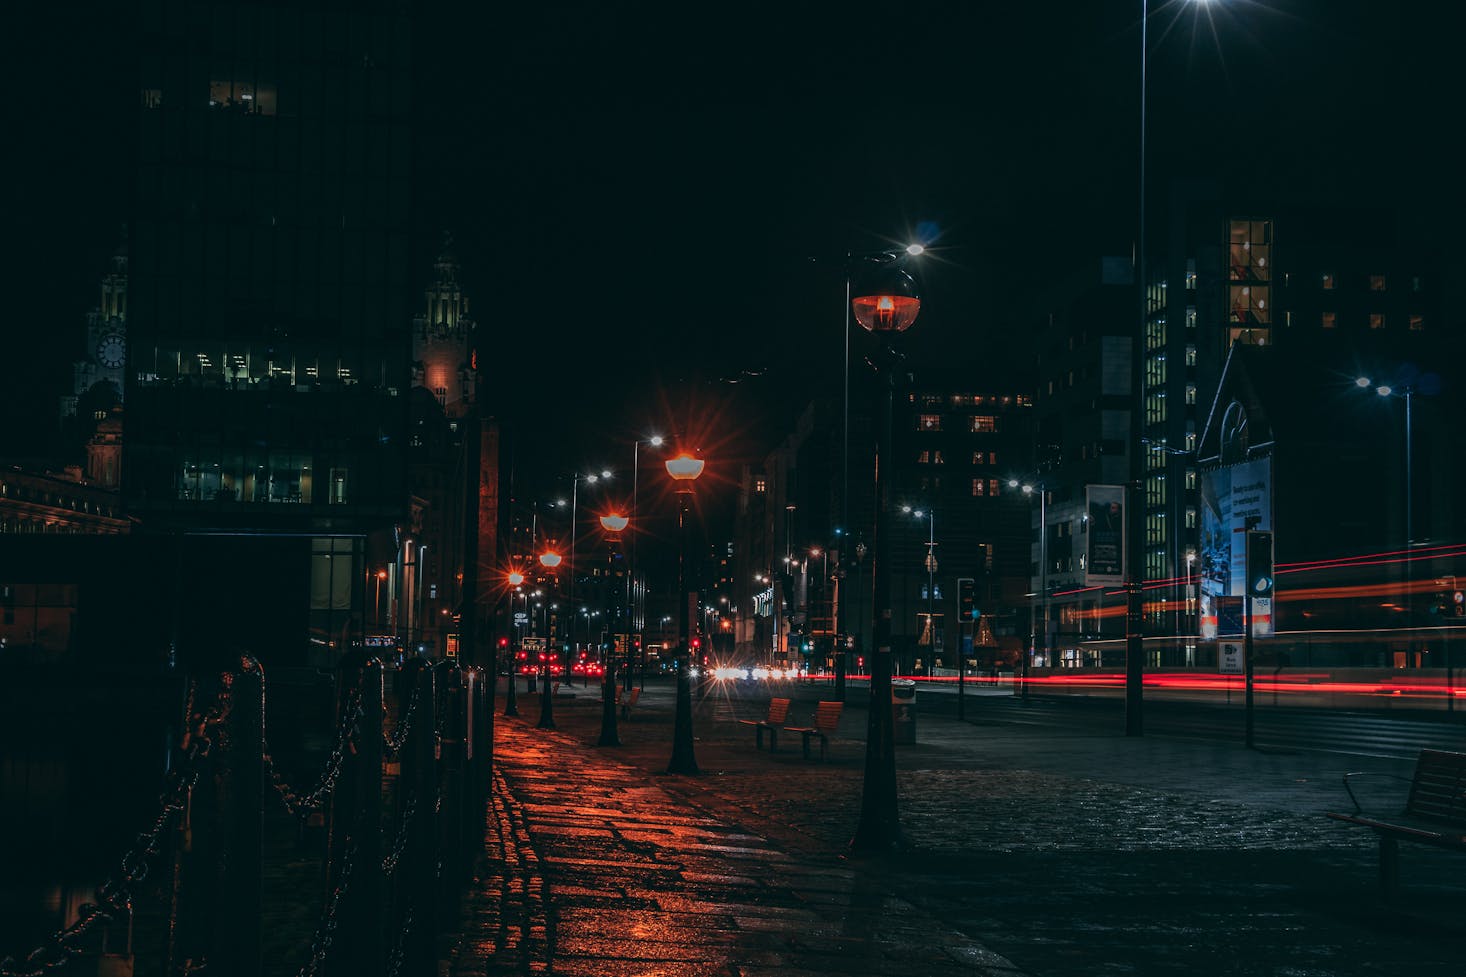 Streets of Liverpool at night